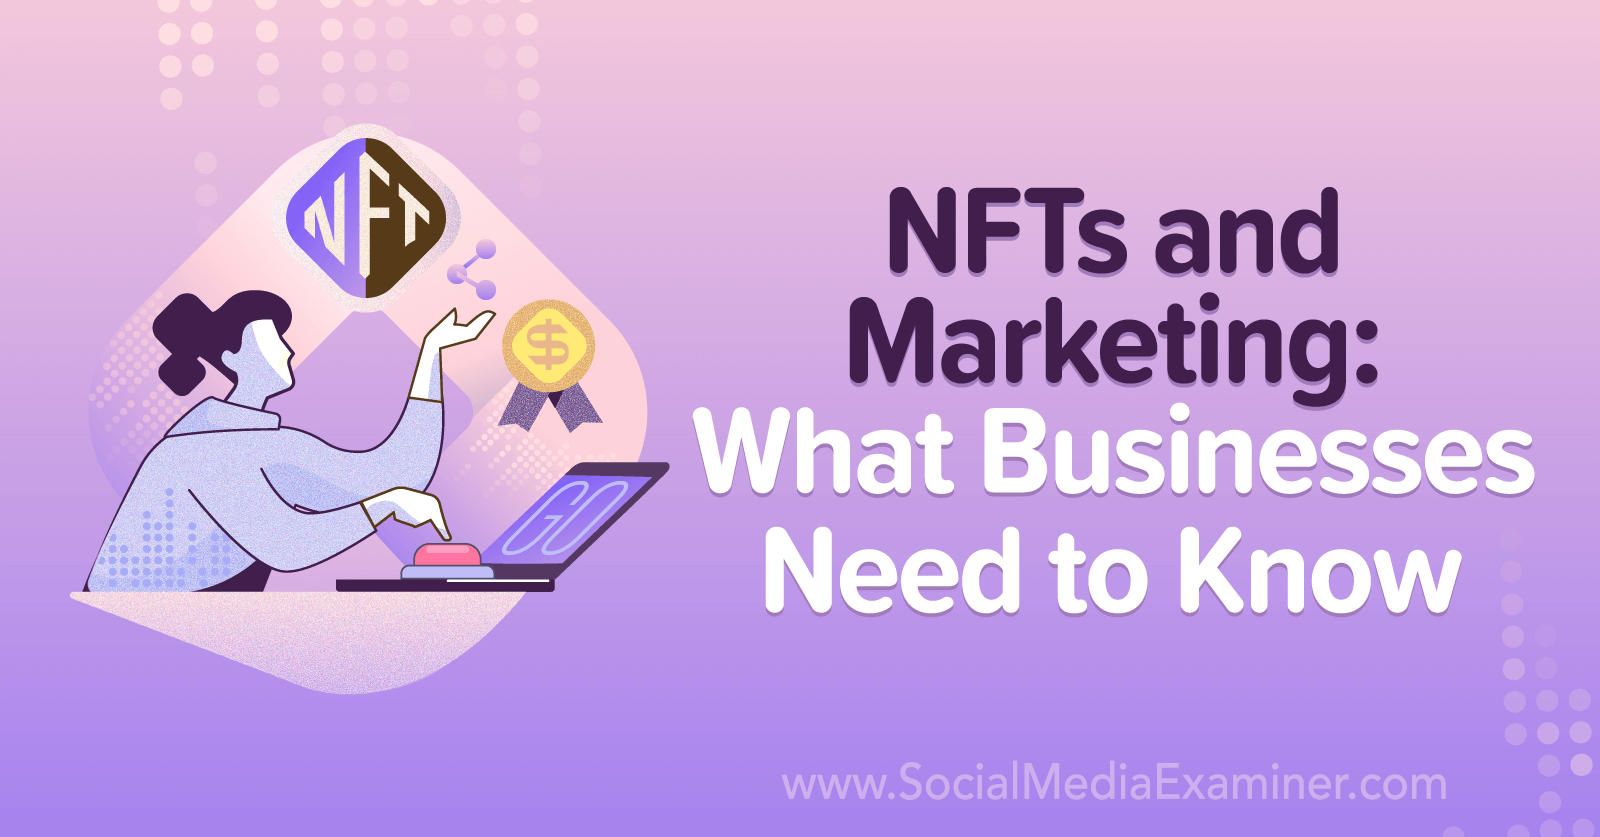 NFTs and Marketing: What Businesses Need to Know featuring insights from Carlos Gil on the Social Media Marketing Podcast.